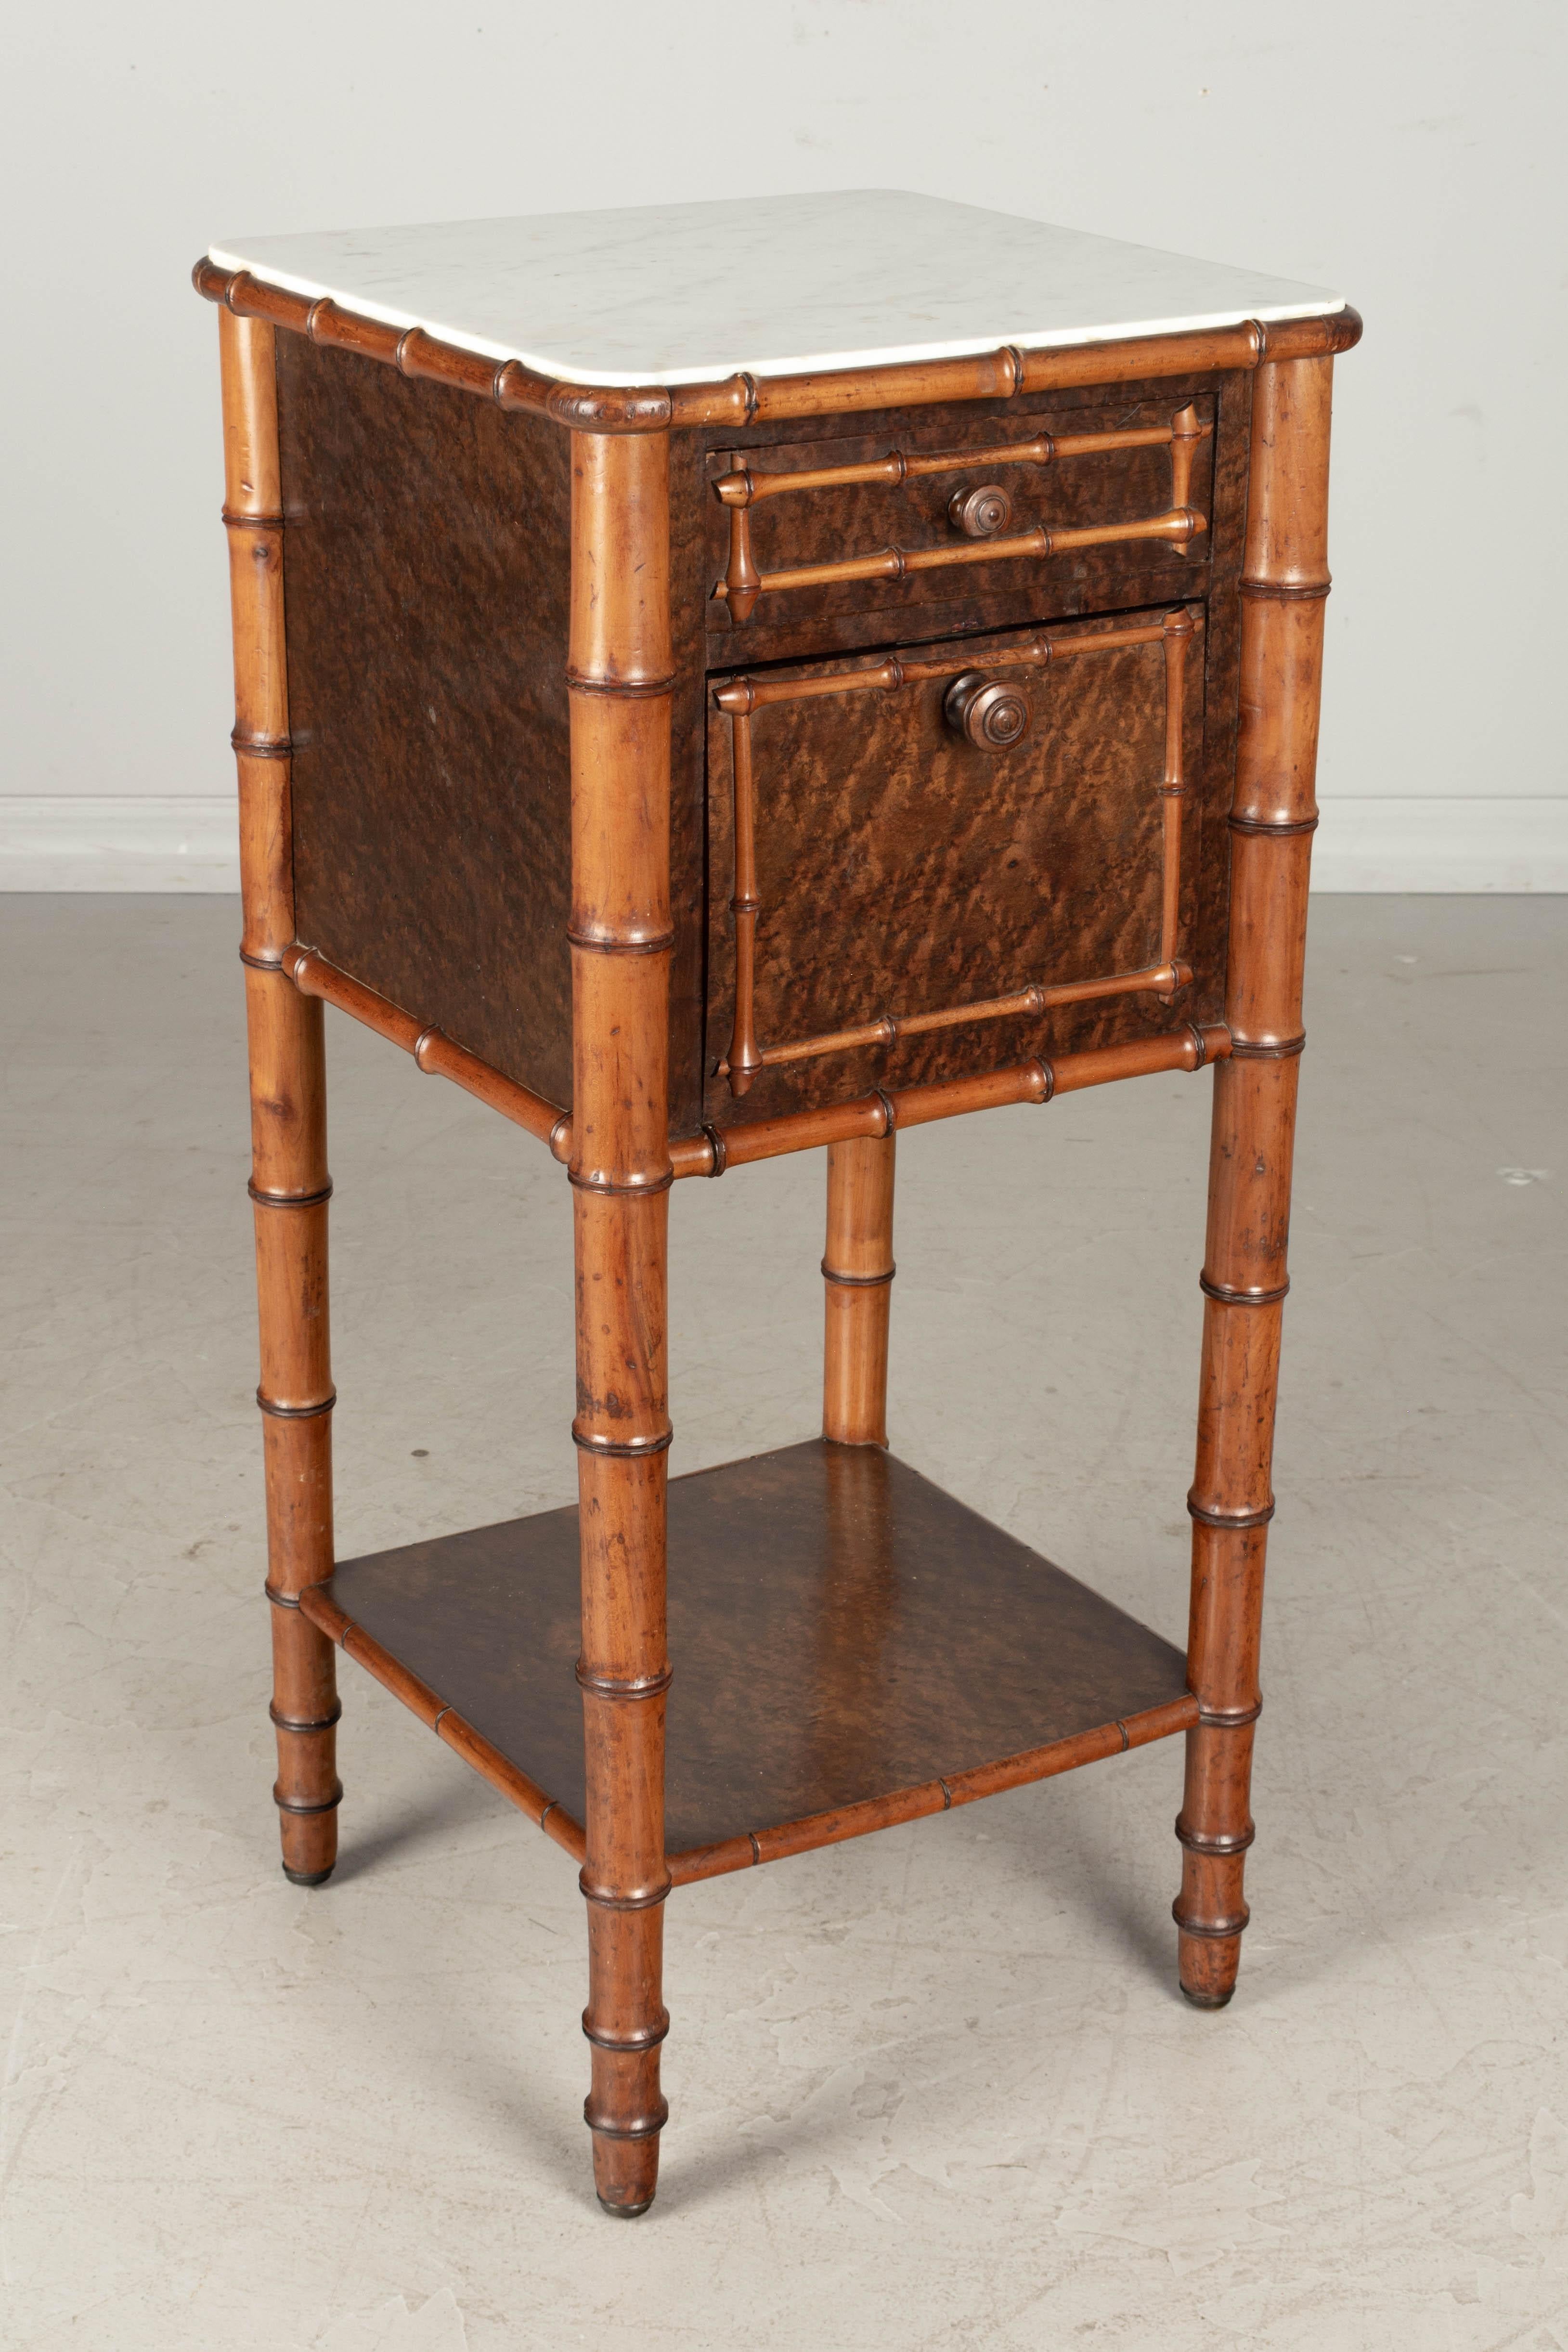 A 19th century French faux bamboo bedside table, or nightstand, made of cherry and dark stained birdseye maple. Dovetailed drawer and a door that hinges open to reveal an interior compartment, once used to store a chamber pot. Turned knobs and legs